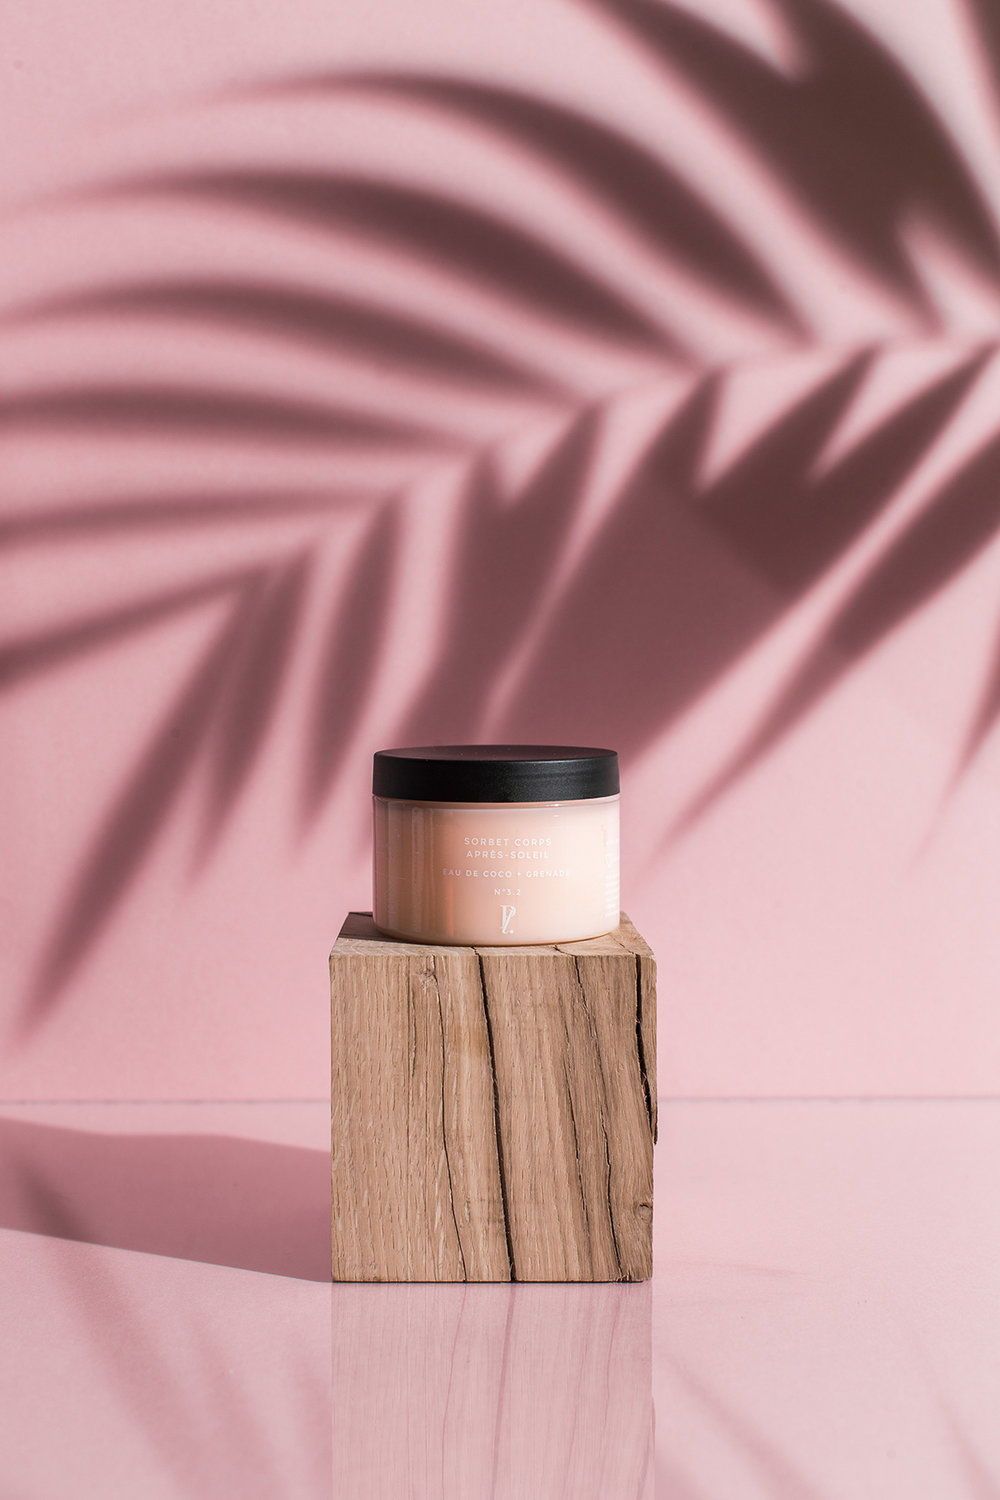 These Natural Beauty Products Make Minimalism Look Good -   beauty Lips photography